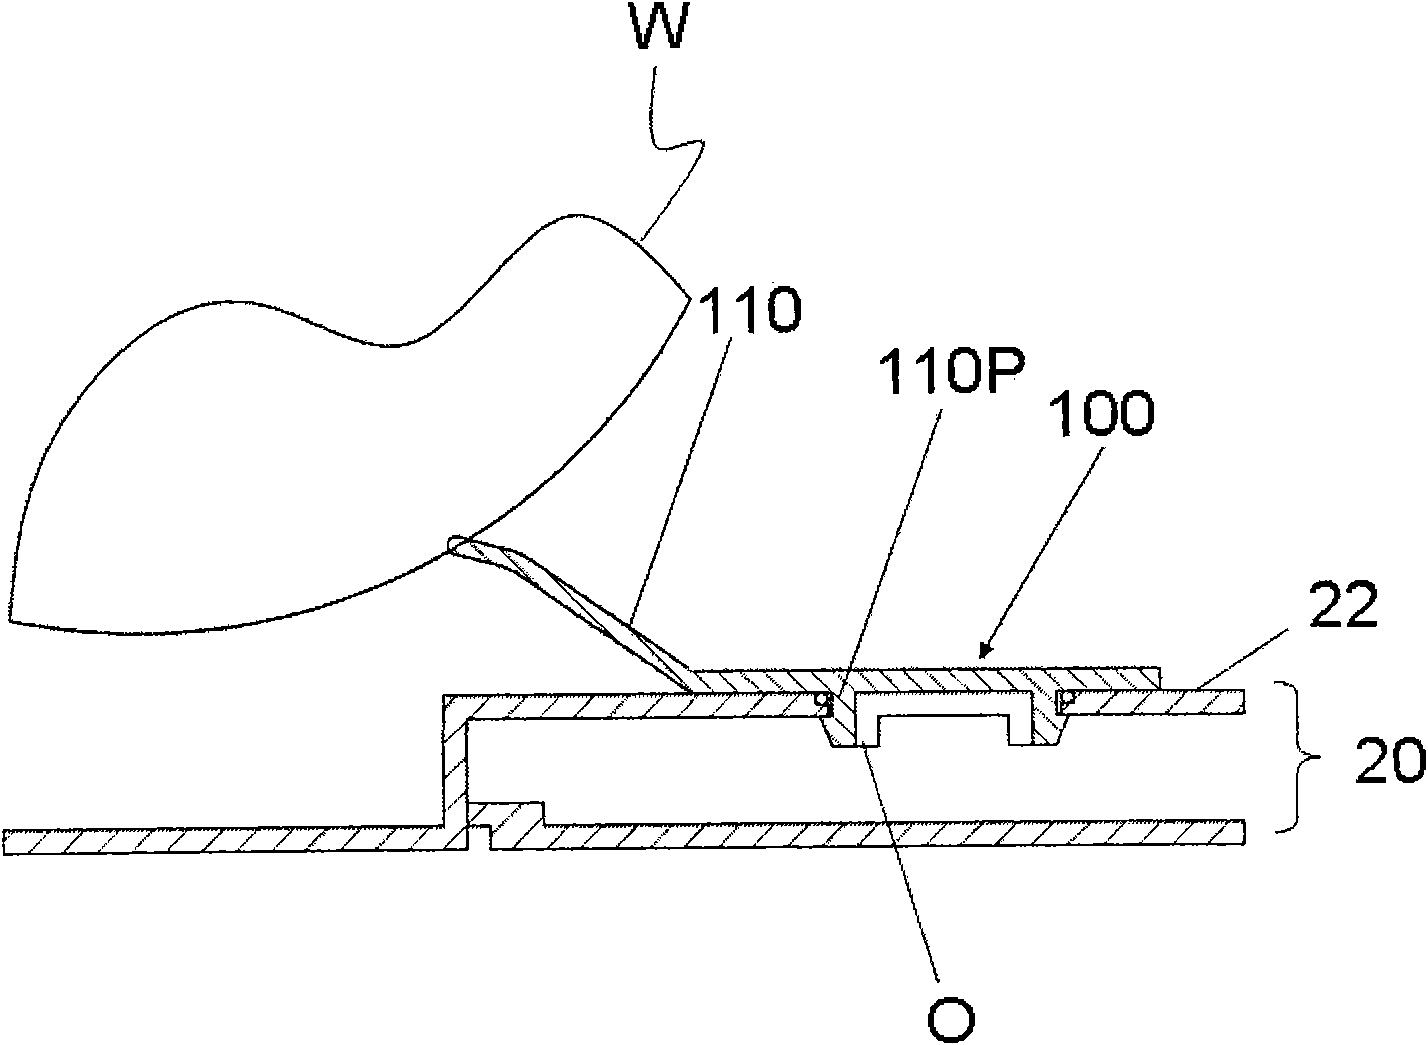 Front-opening unified pod with wafer constraints arranged on door